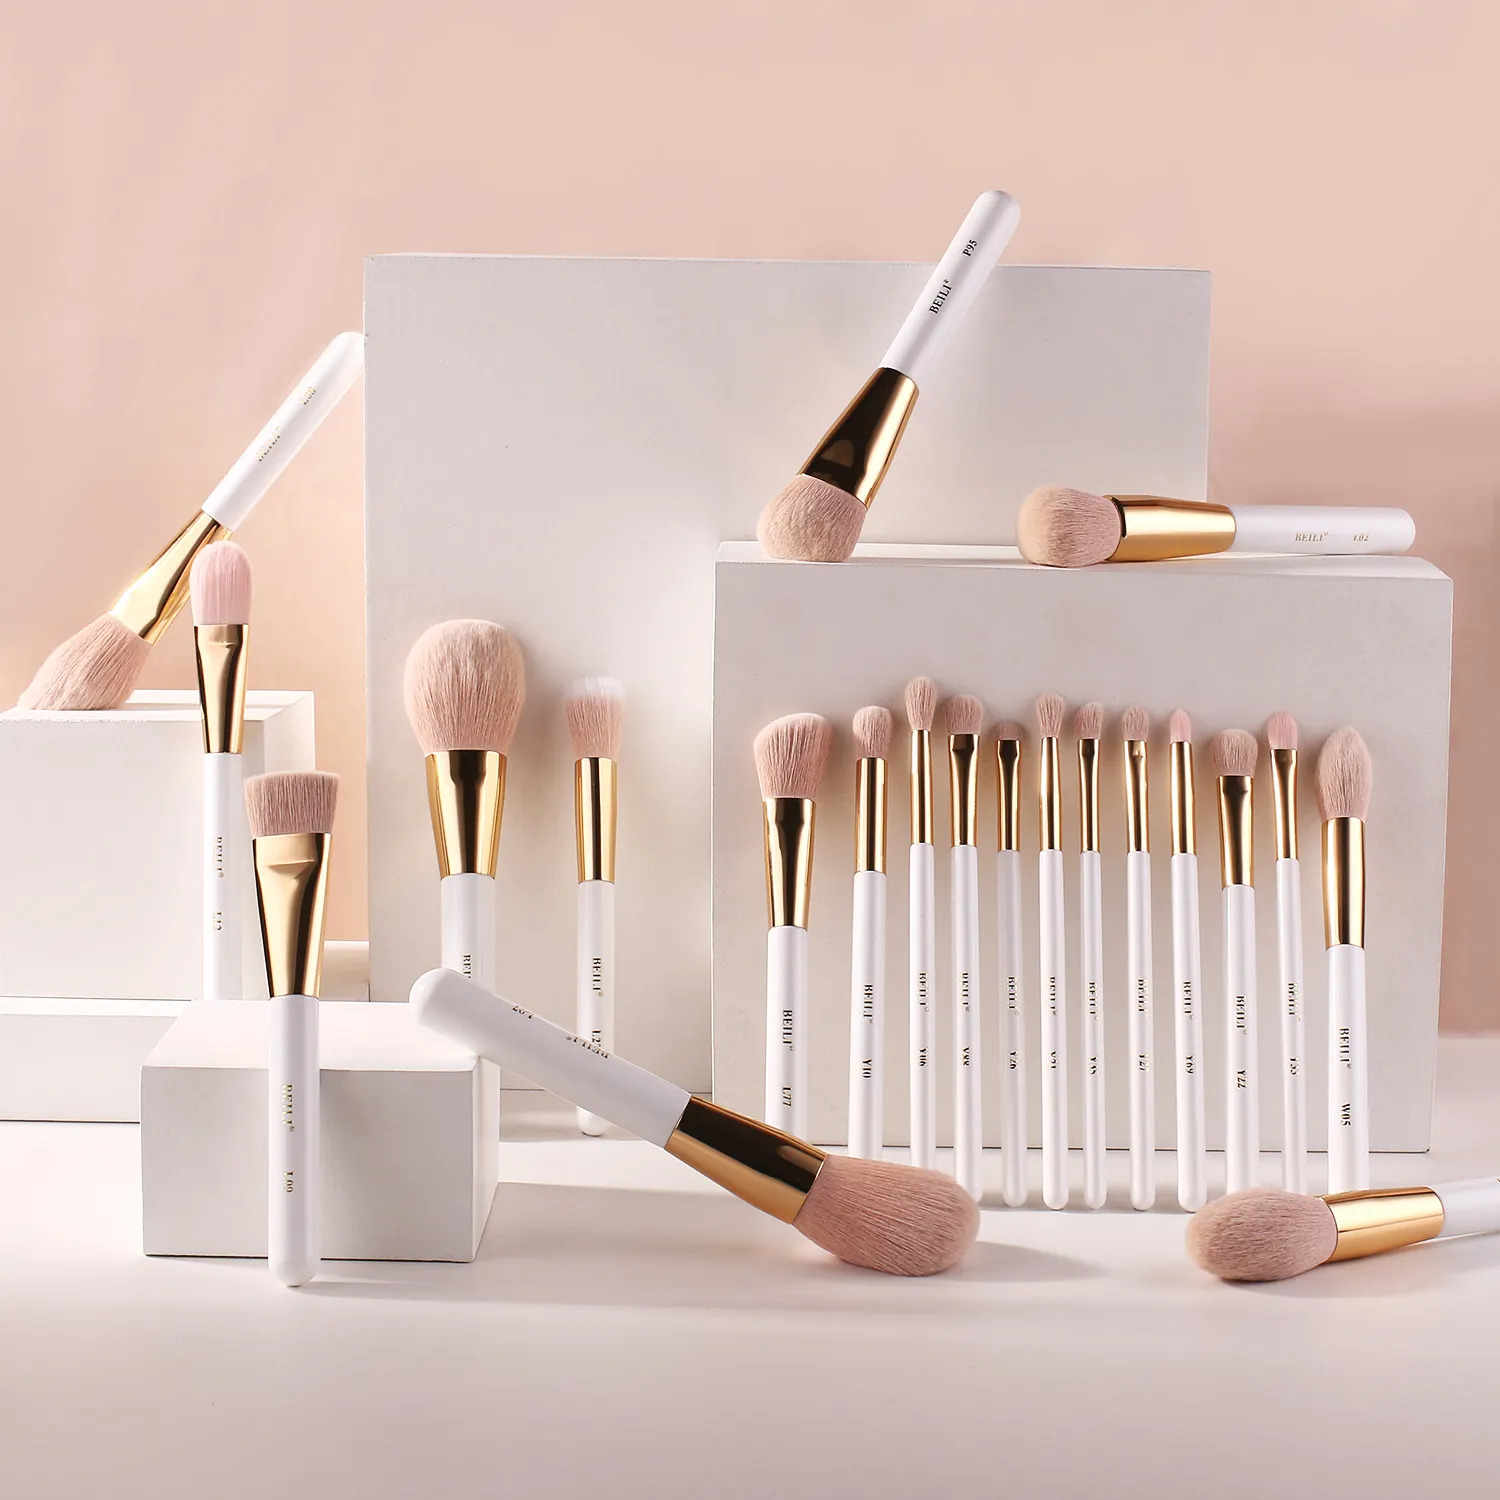 BEILI hight quality 30pcs white and gold make up brushes premium Synthetic hair brush sets makeup cosmetic brush with logo